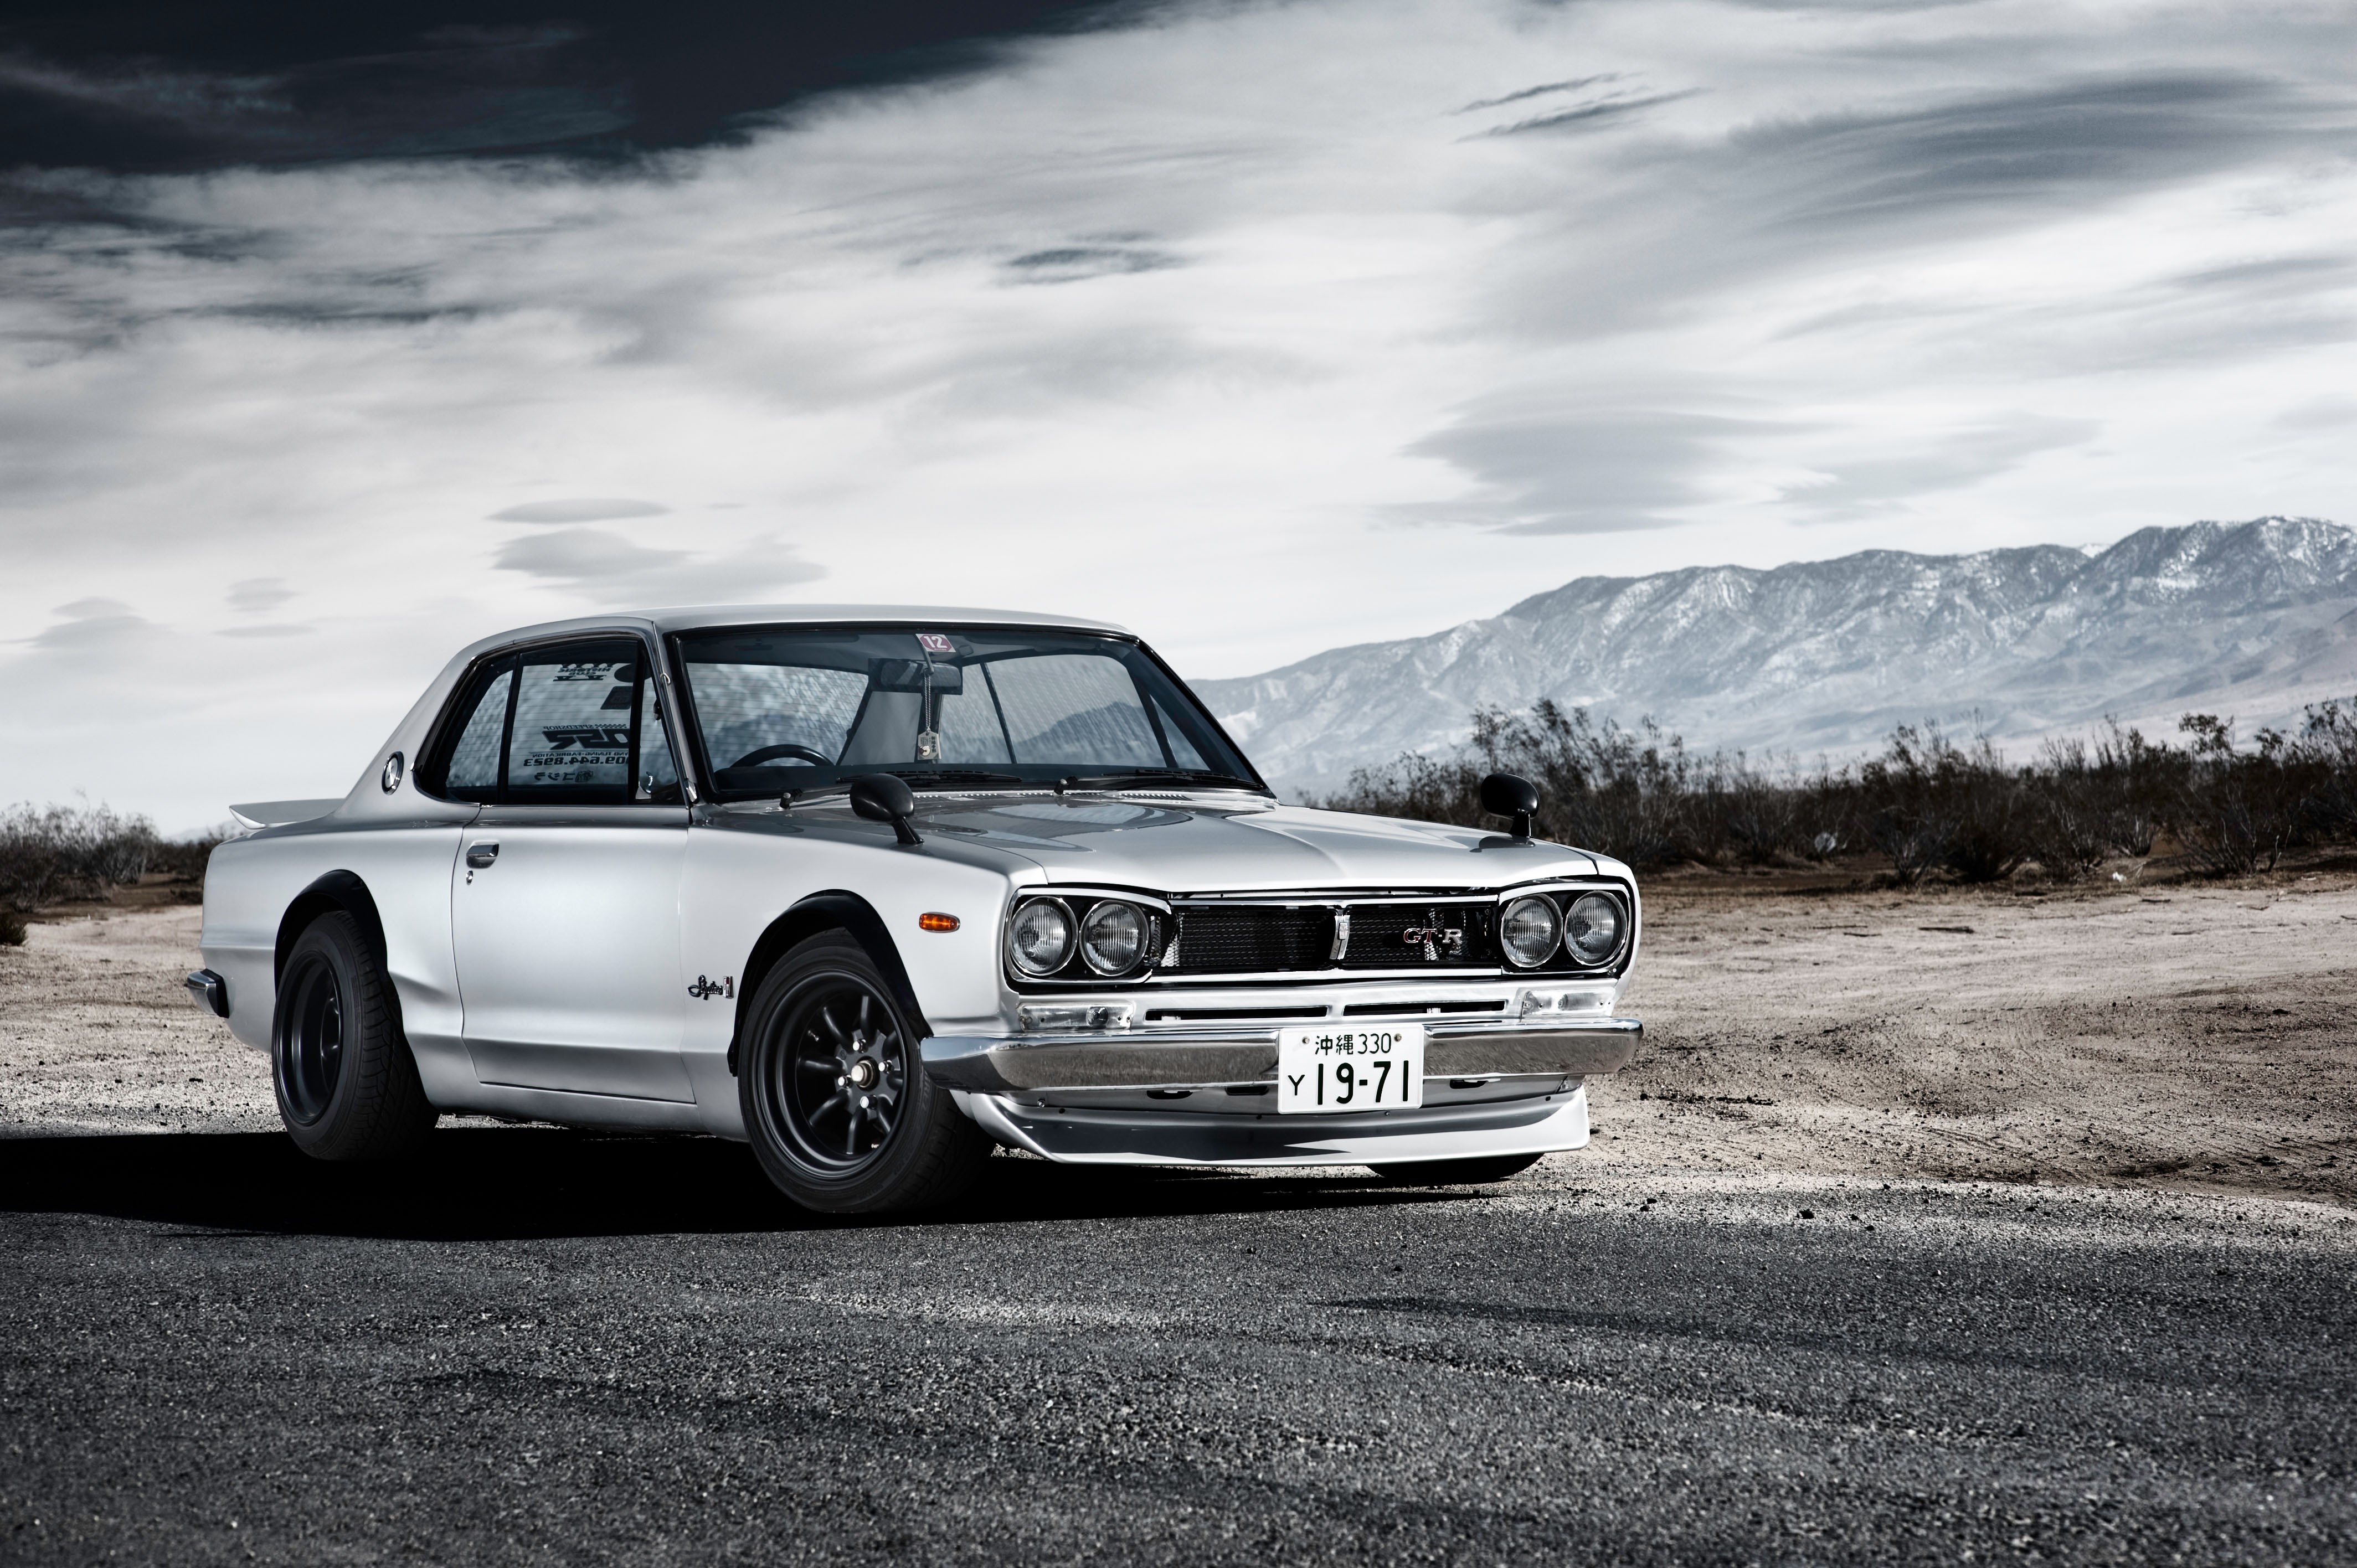 General 4256x2832 Nissan Skyline Nissan Nissan Skyline C10 car frontal view mountains vehicle numbers silver cars